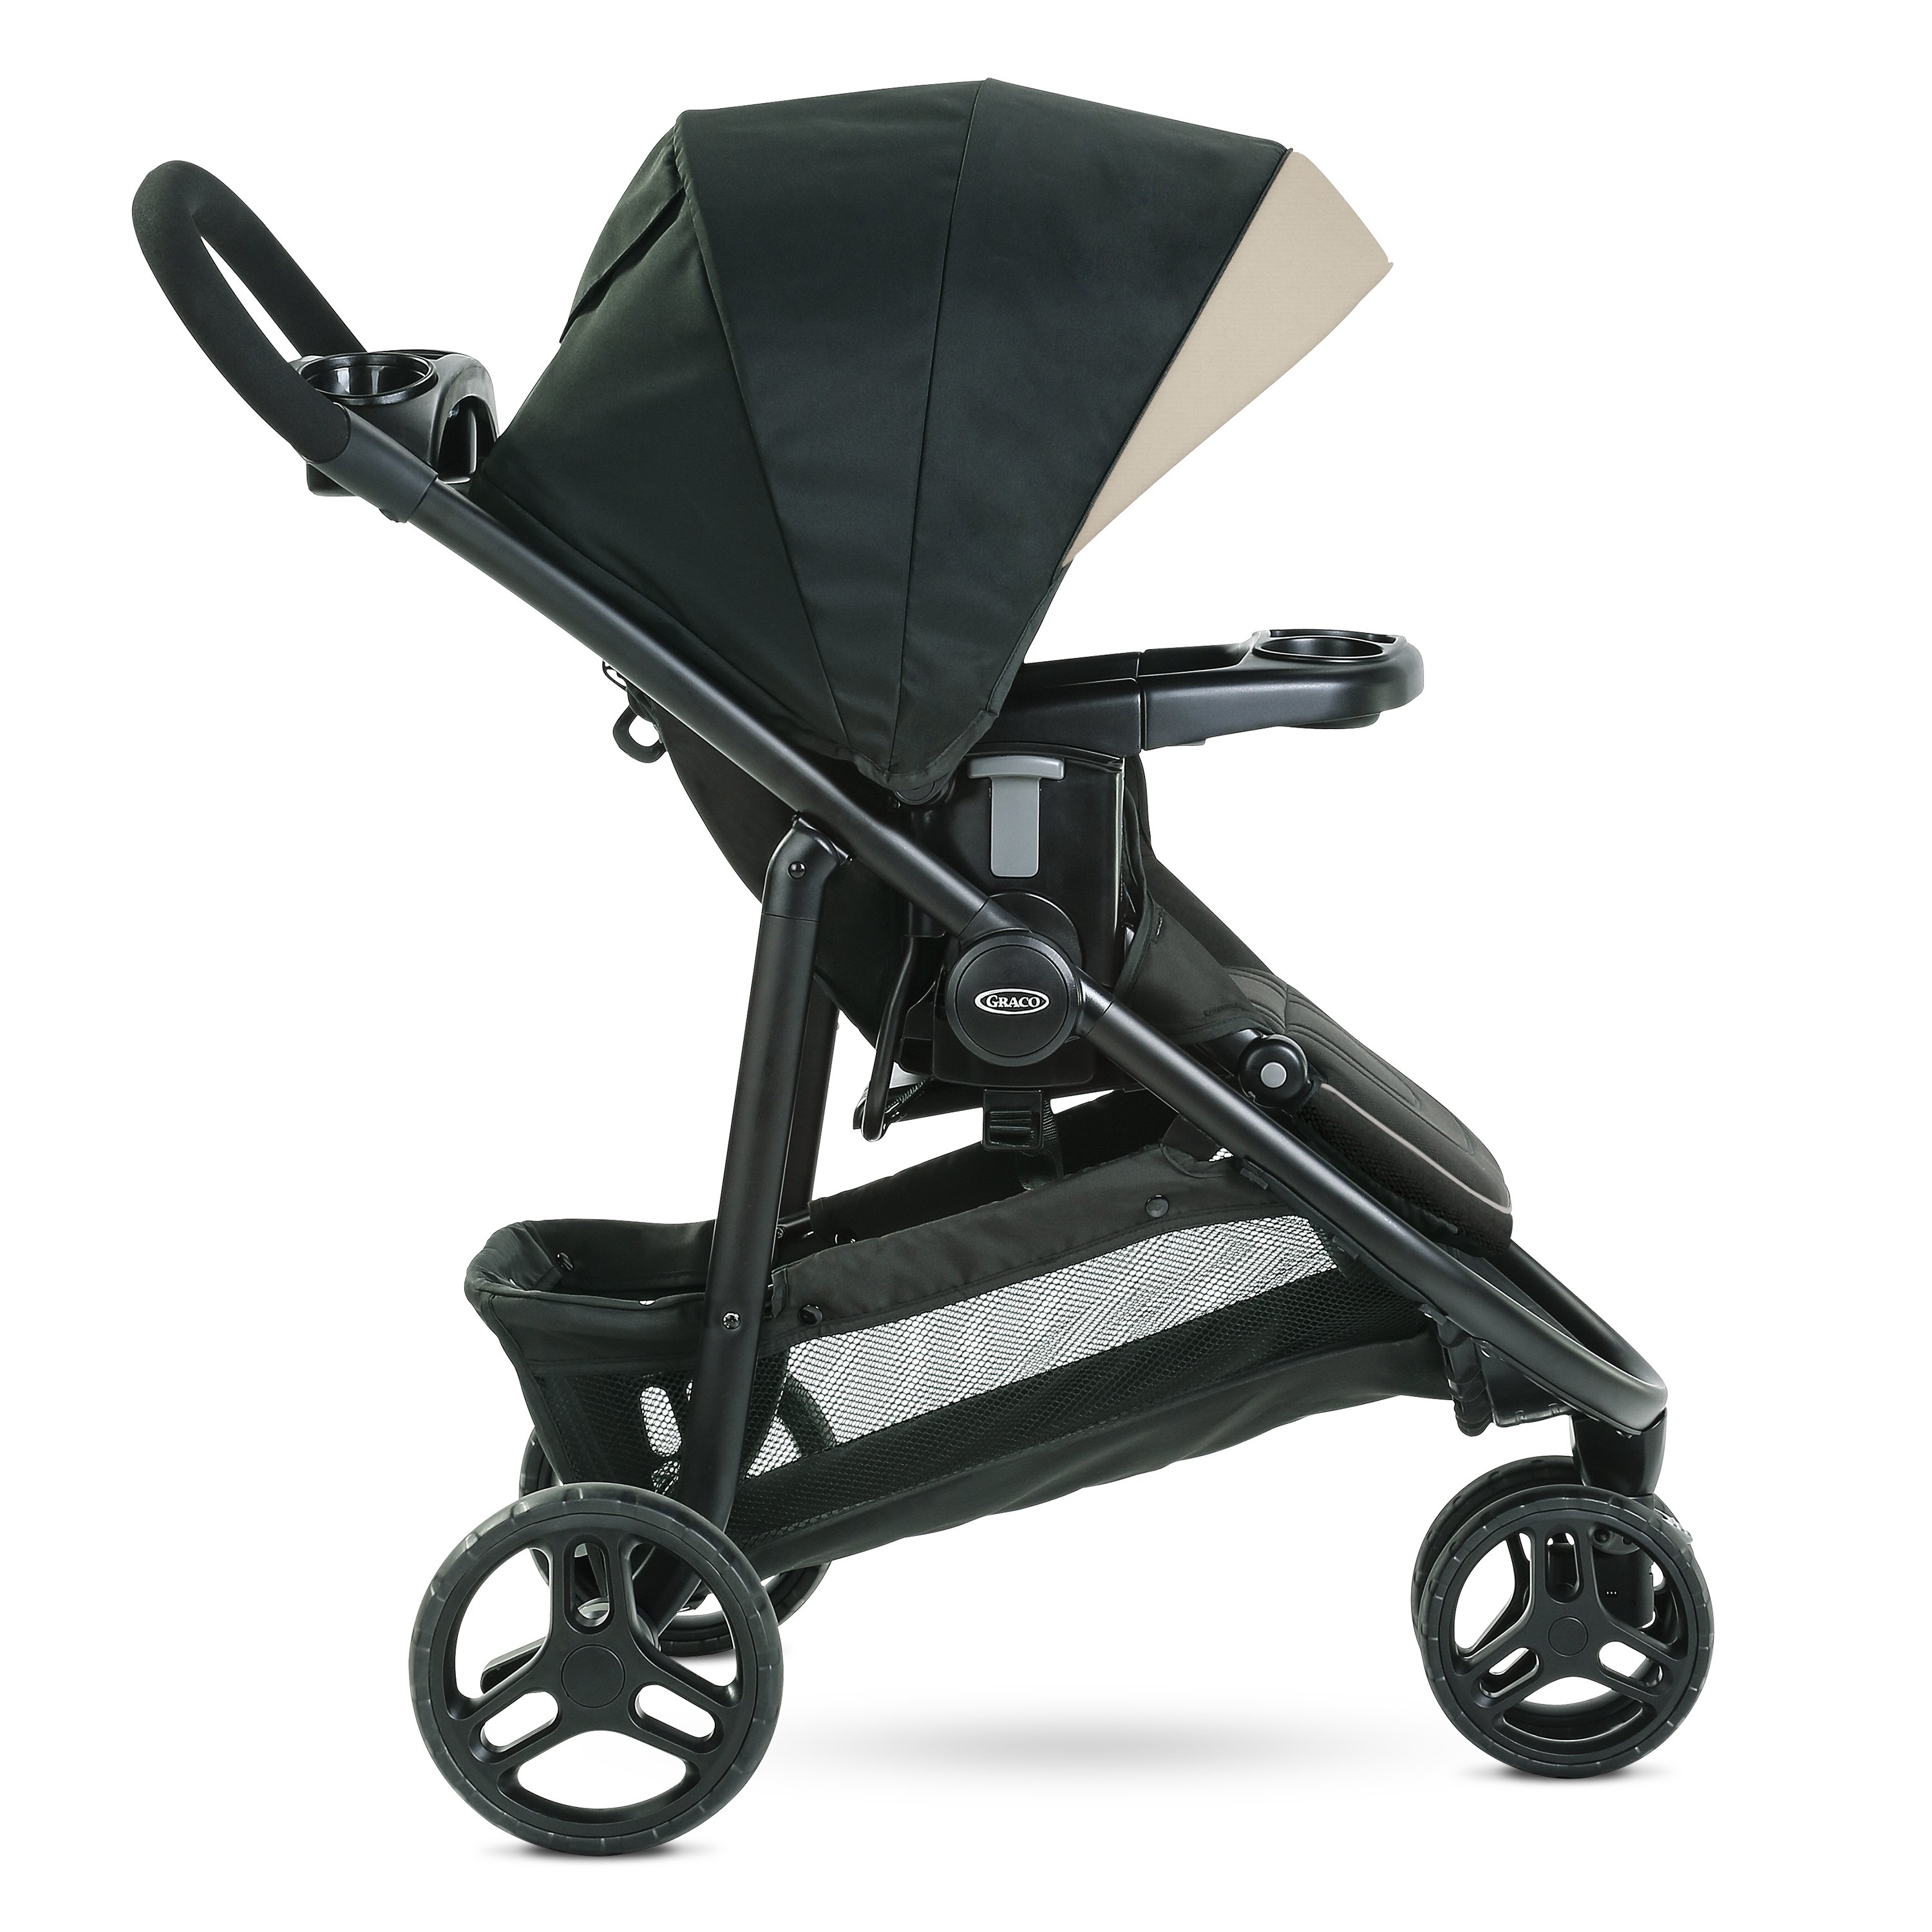 mothers choice grace stroller review